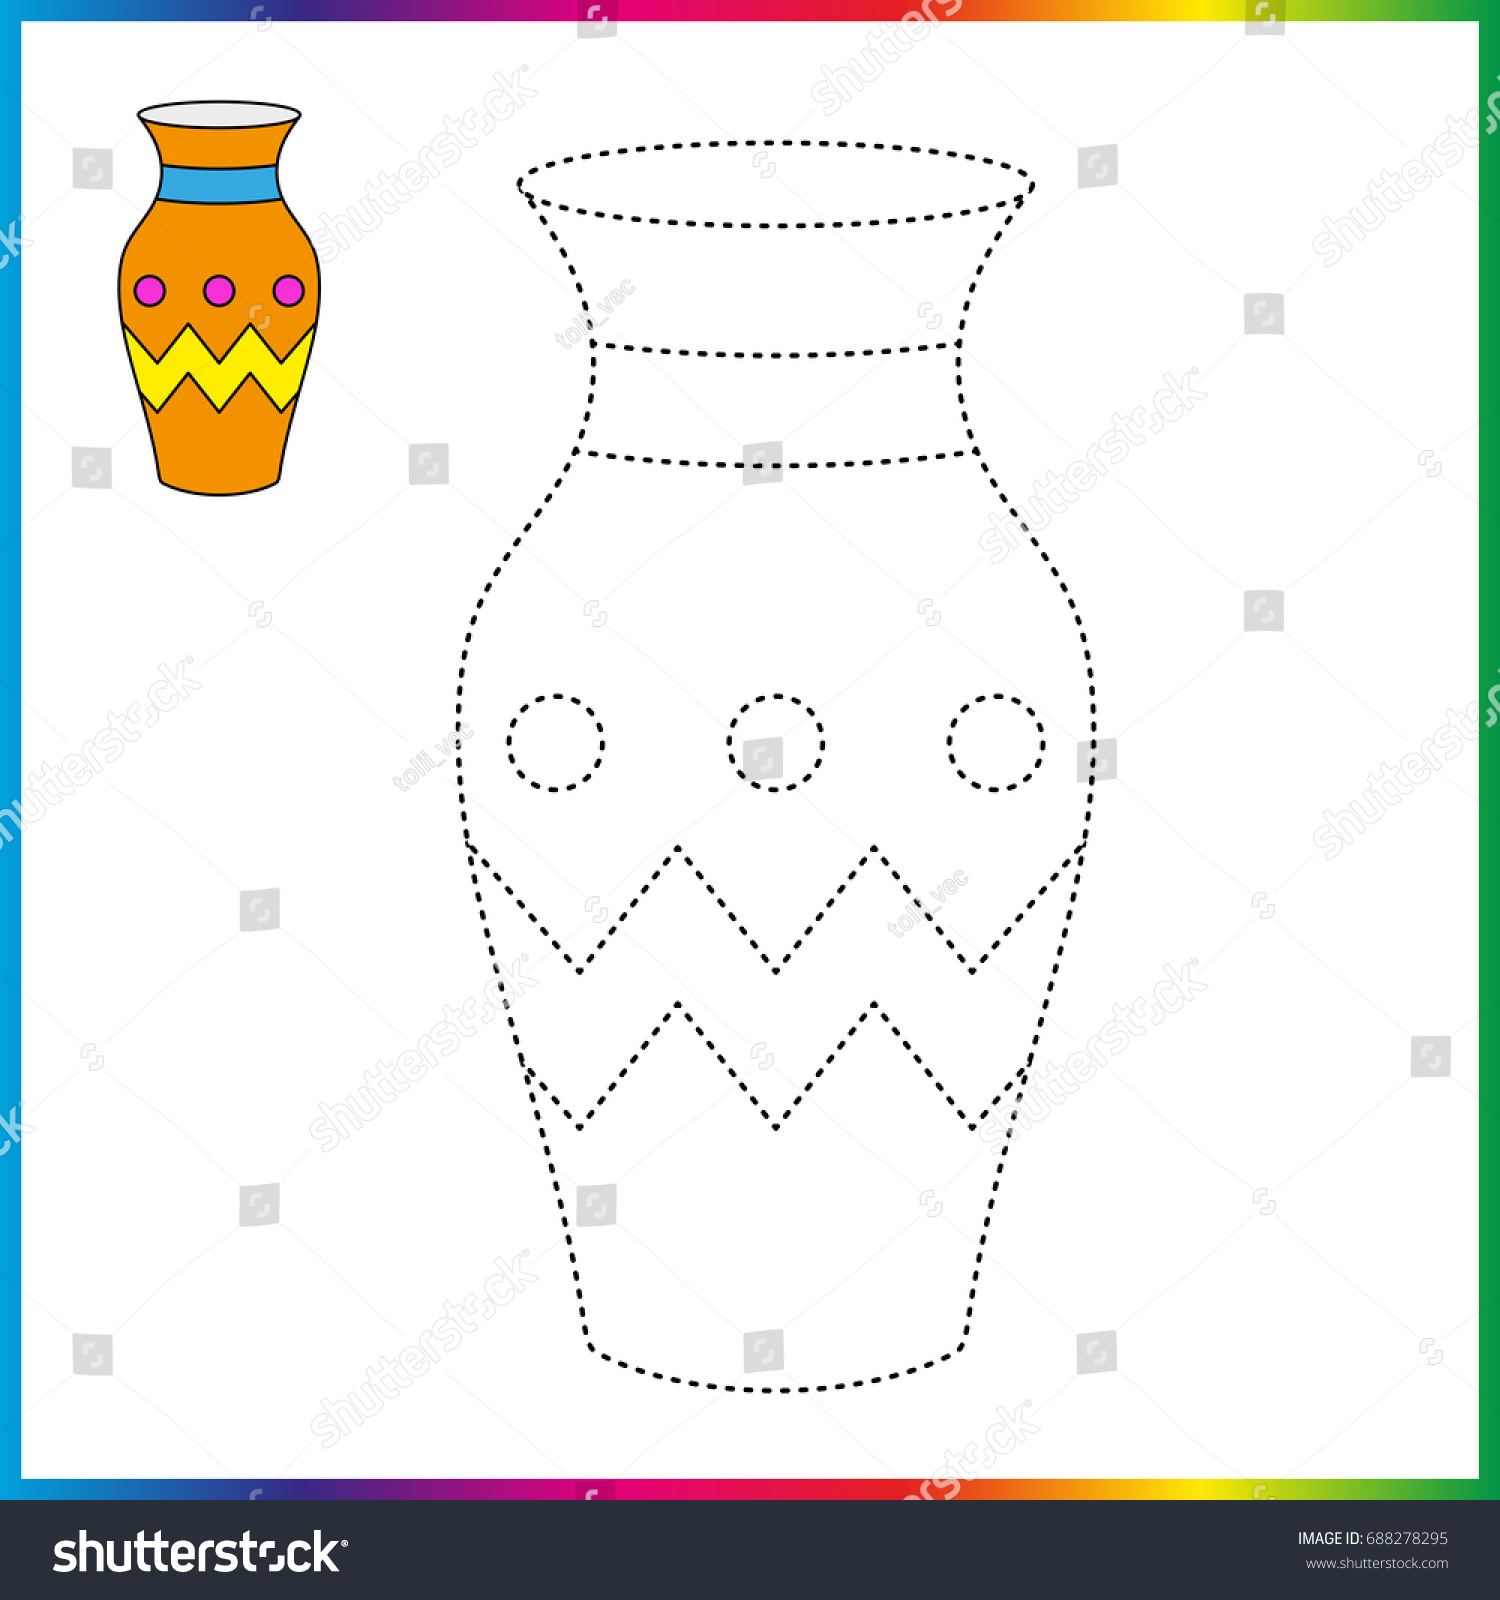 Vase connect dots coloring page worksheet stock vector royalty free